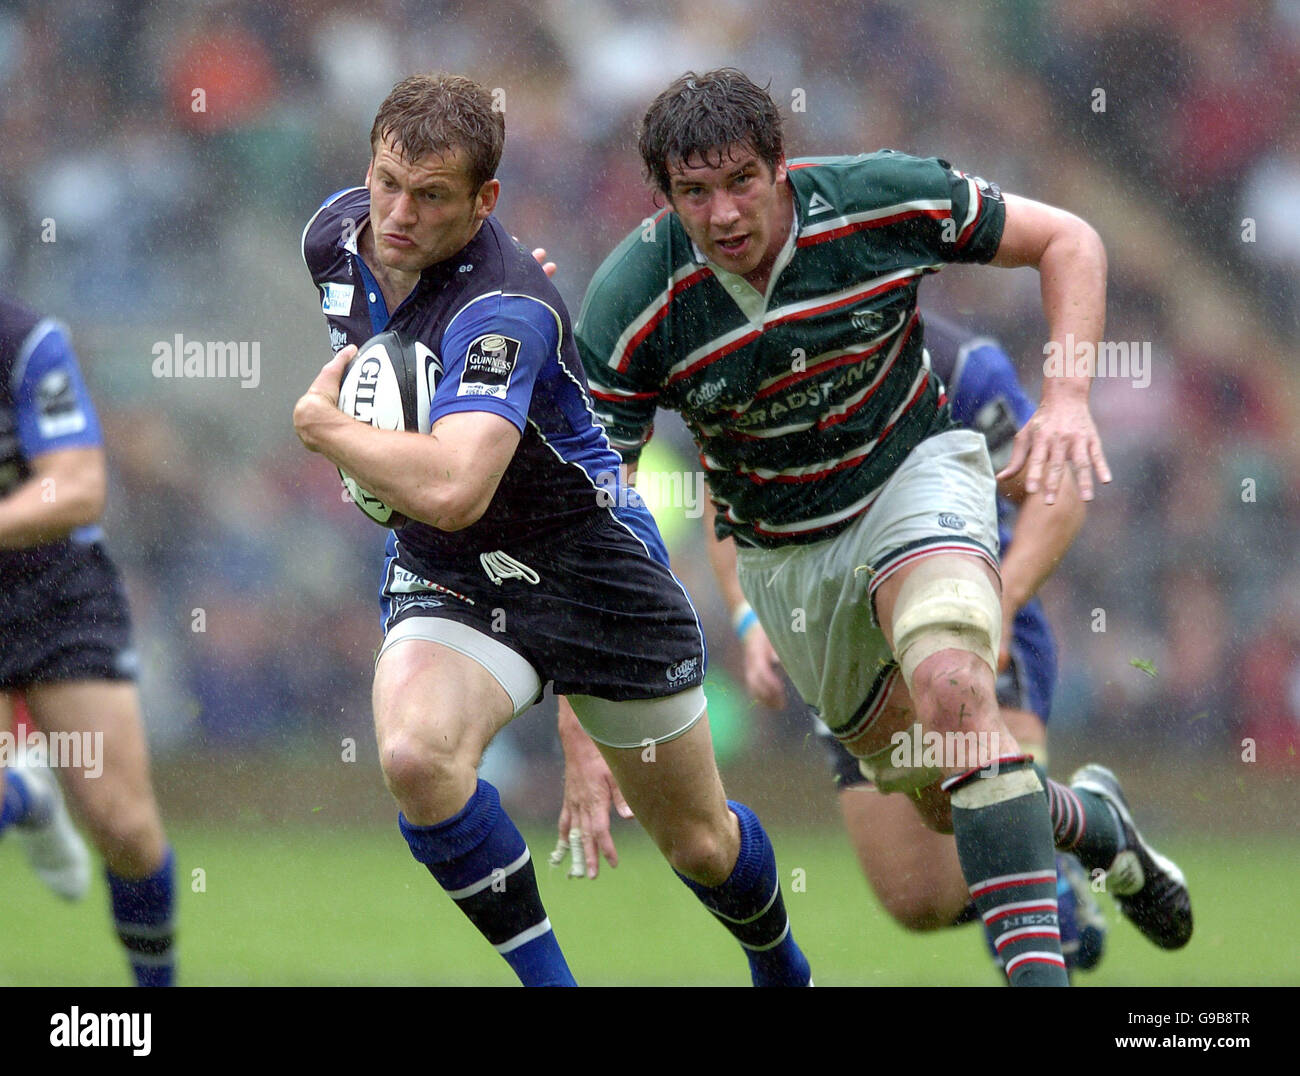 Rugby Union - Guinness Premiership Final 2006 - Sale Sharks v Leicester Tigers - Twickenham. Sale Sharks' Mark Cueto and Leicester Tigers' San Vesty Stock Photo